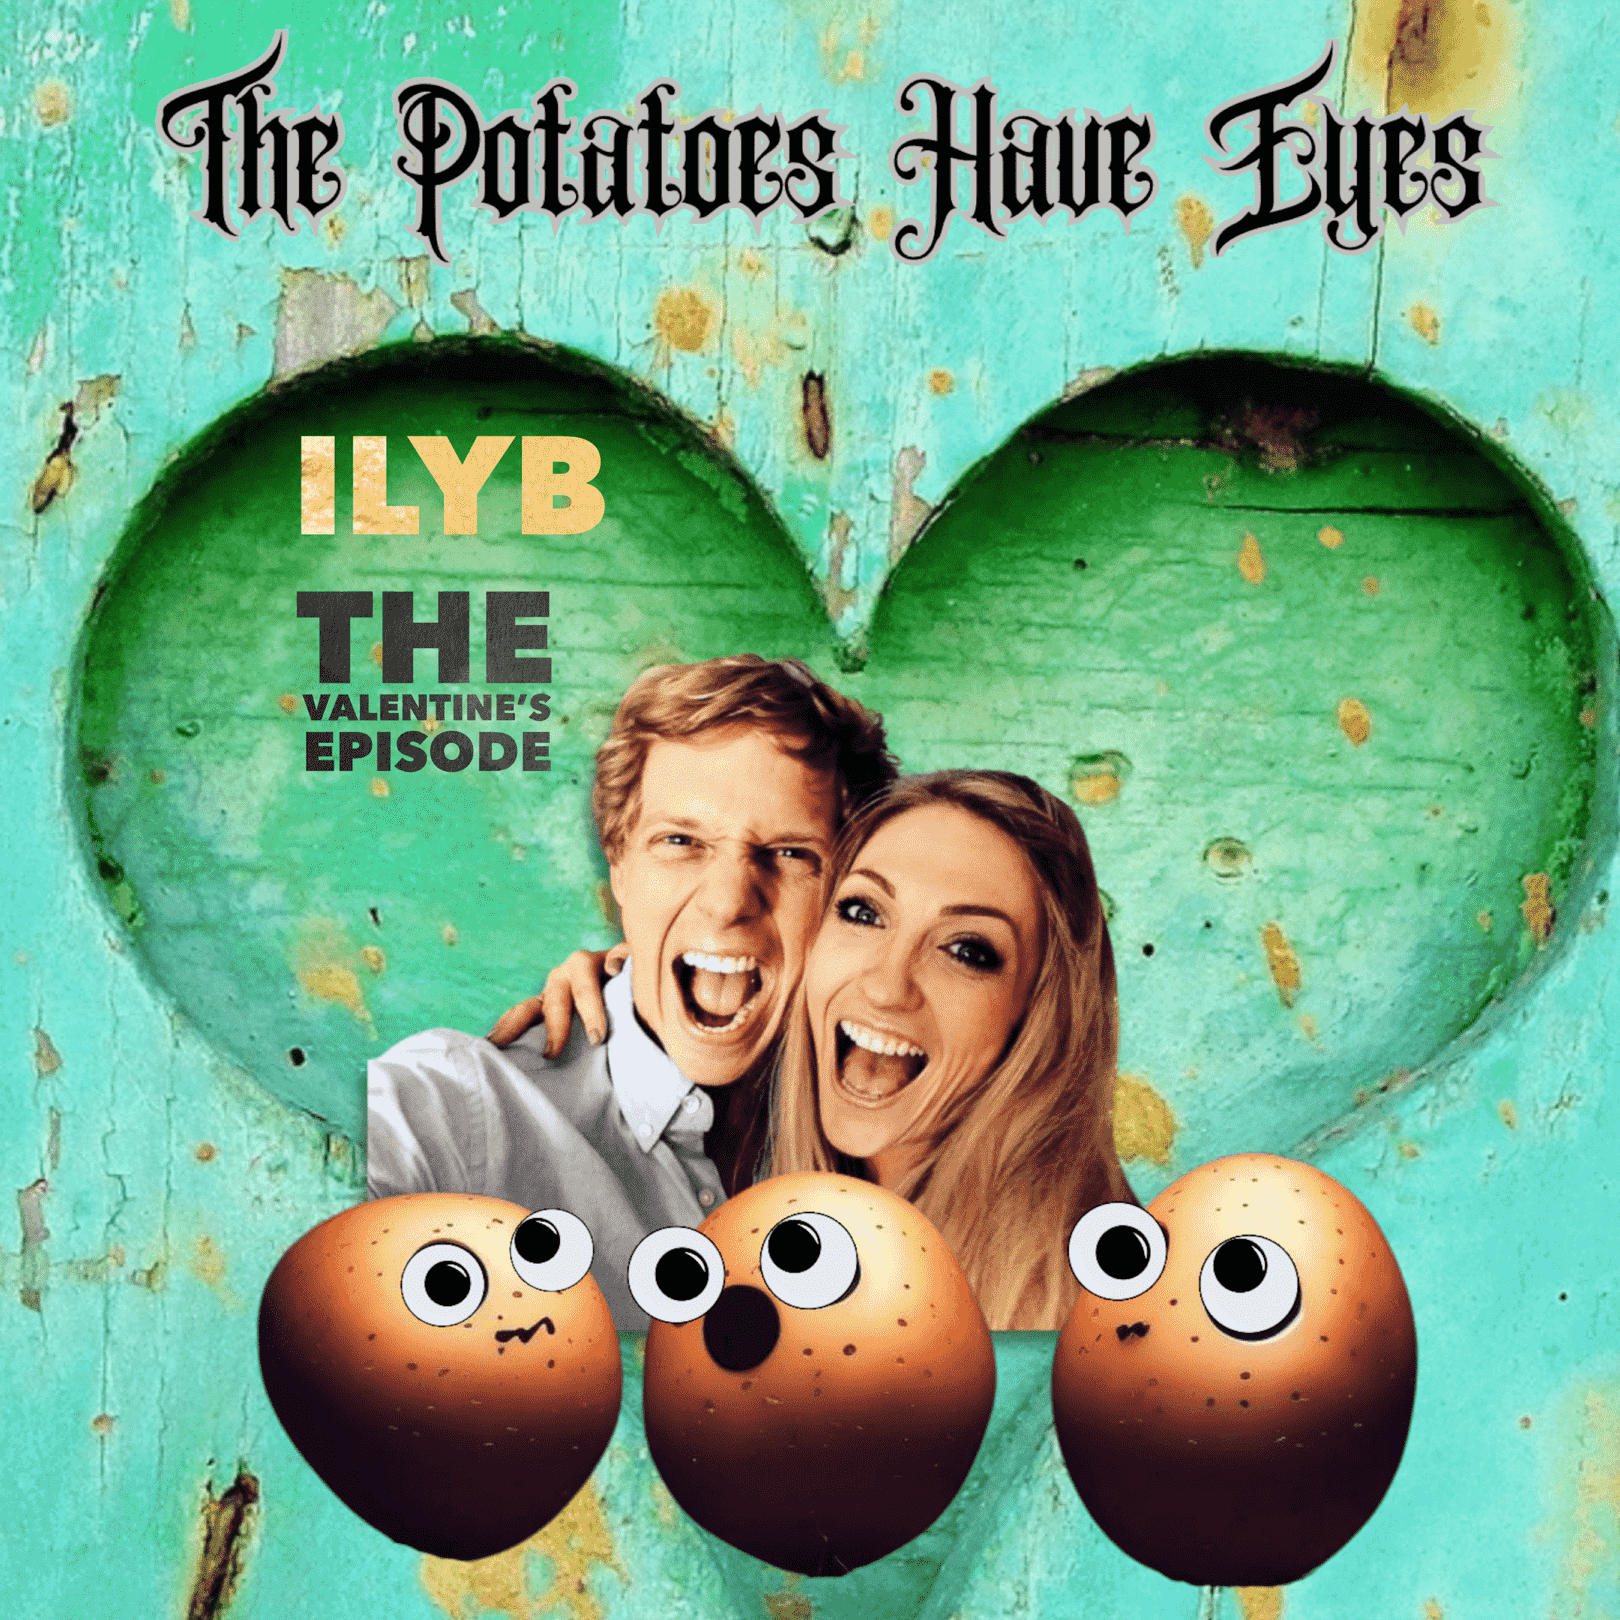 The Potatoes Have Eyes (The Valentine's Episode)